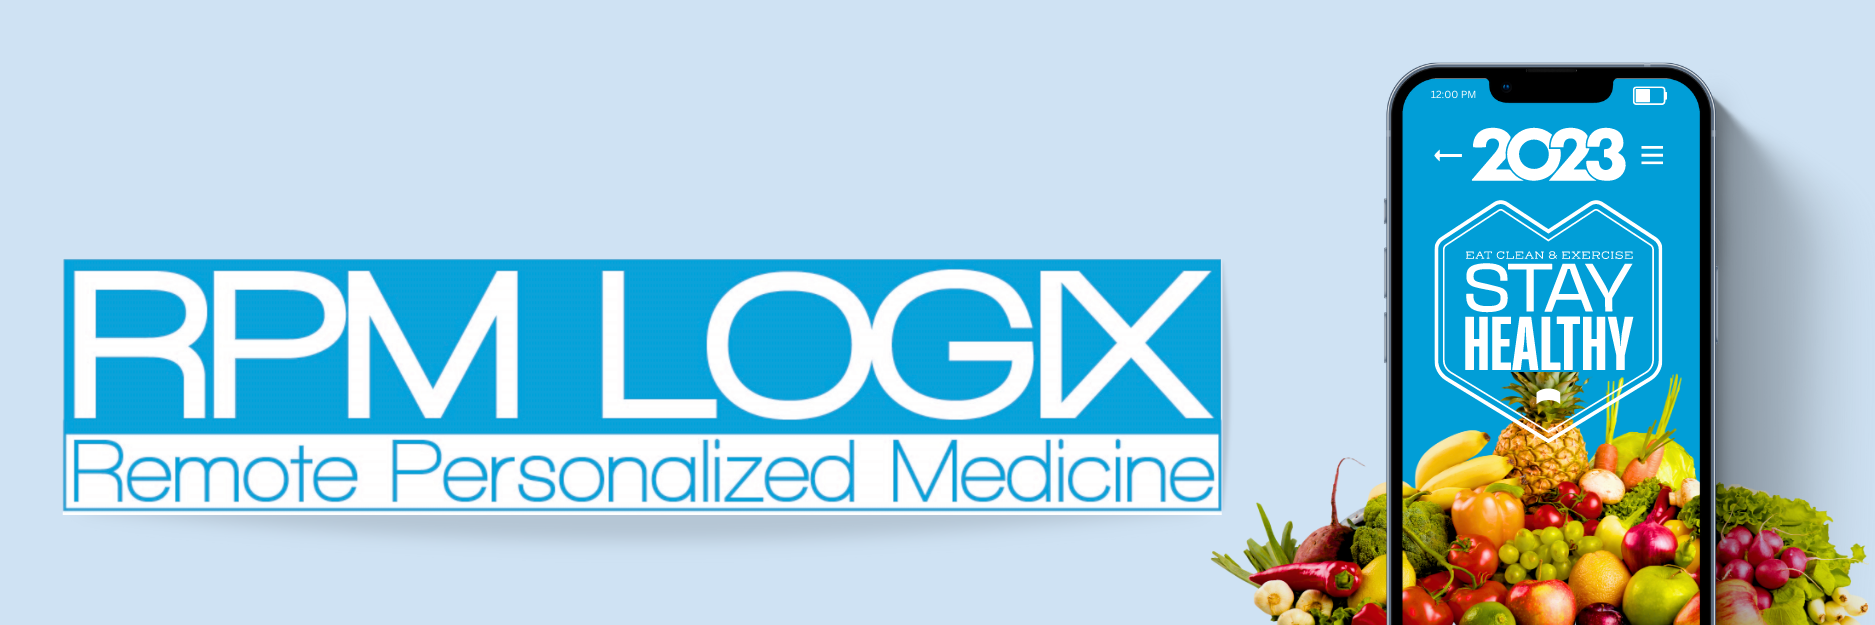 Logx remote personalized medicine with Gravity.